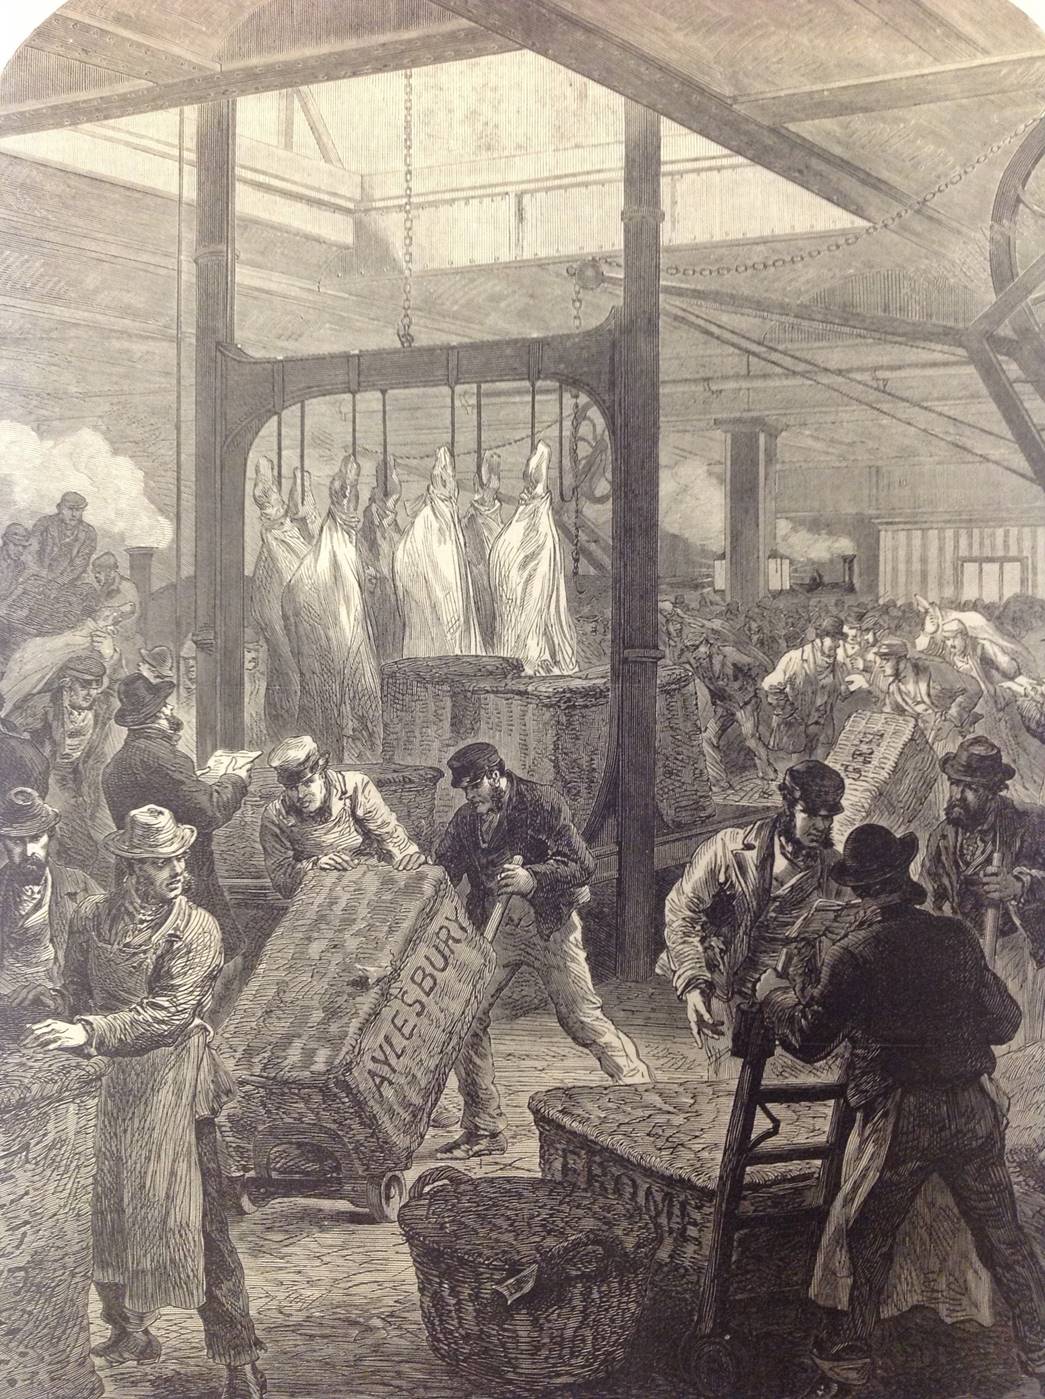 Arrival of an early Meat Train, 15 January 1870. Illustrated New Weekly. (ID no.: LIB4774/15)